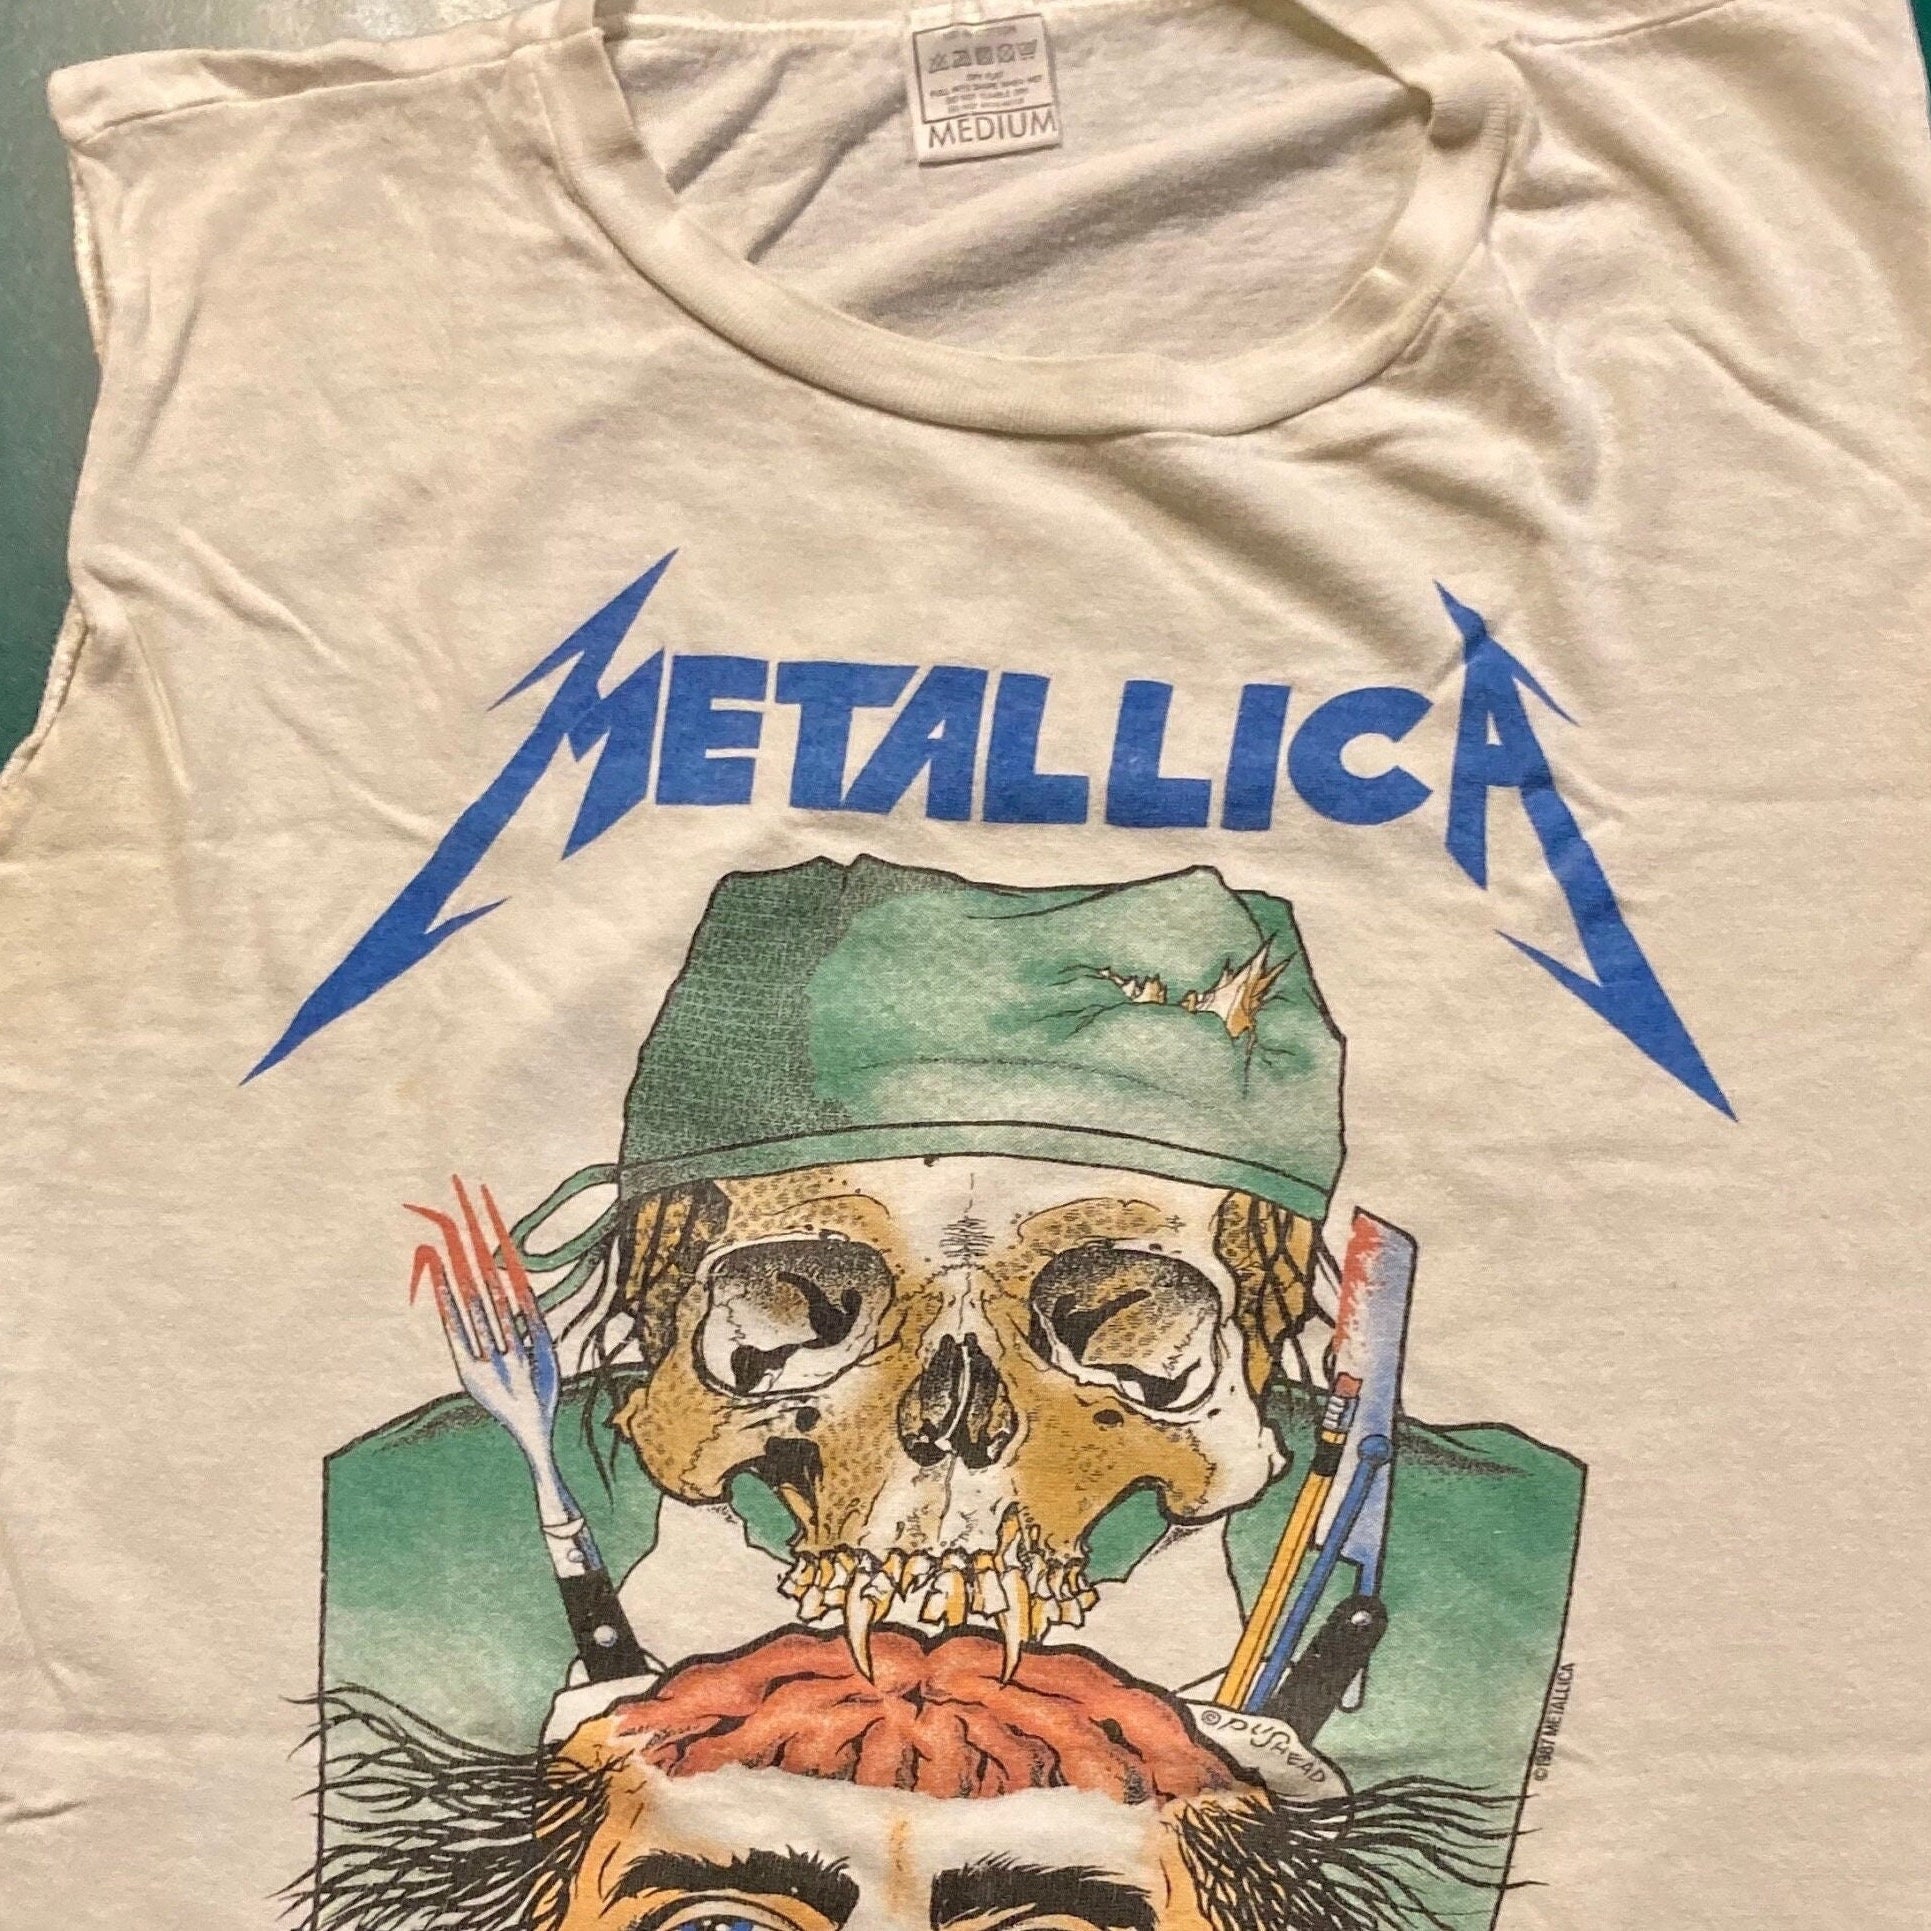 15 Vintage Metallica T-Shirts - All Size XL - Some Rare